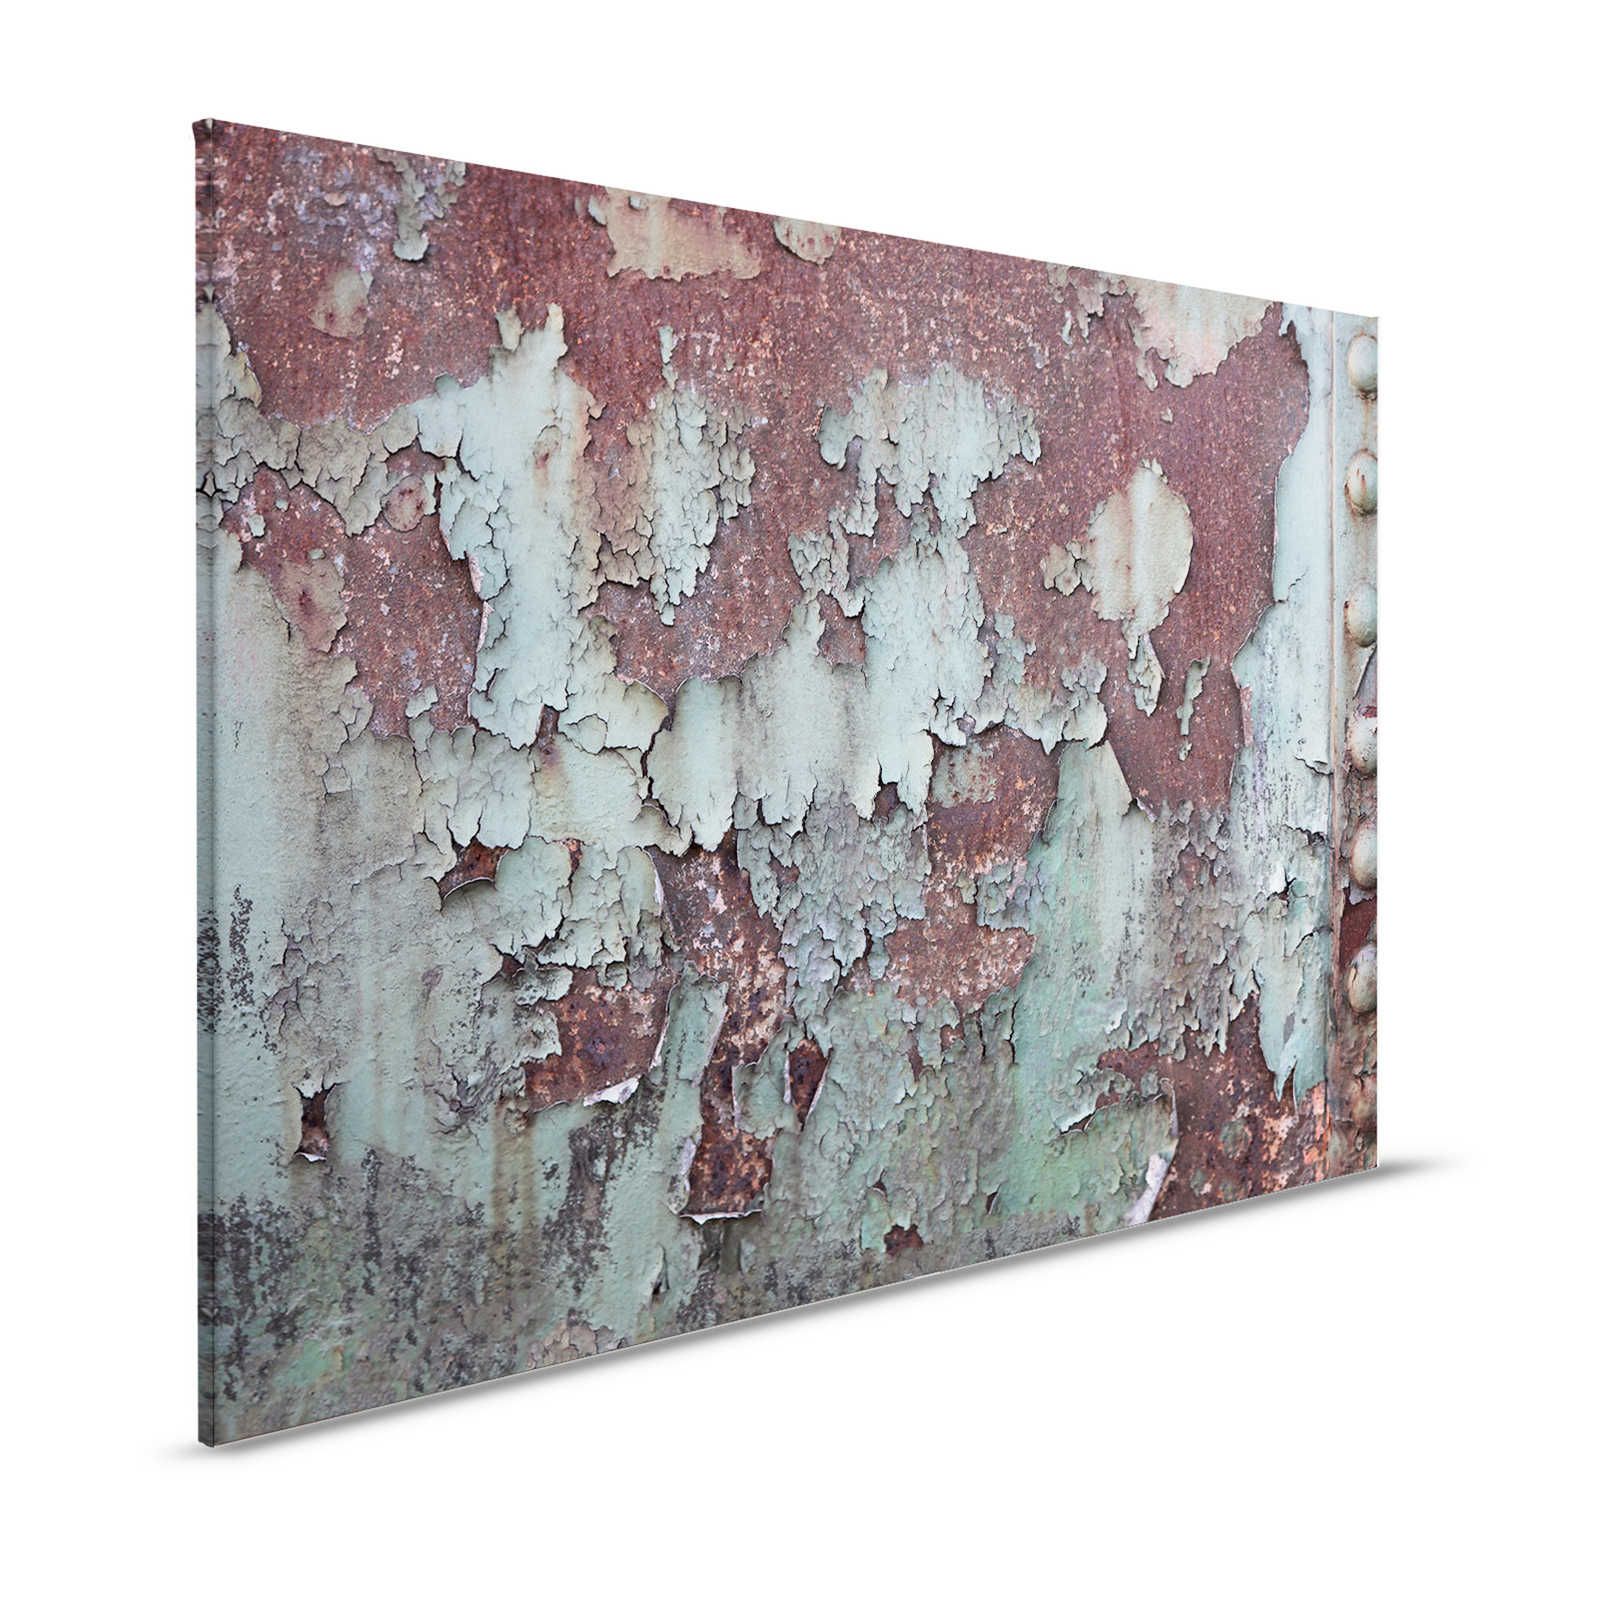 Canvas painting corroding ship's wall - metal plate with rust - 1.20 m x 0.80 m
